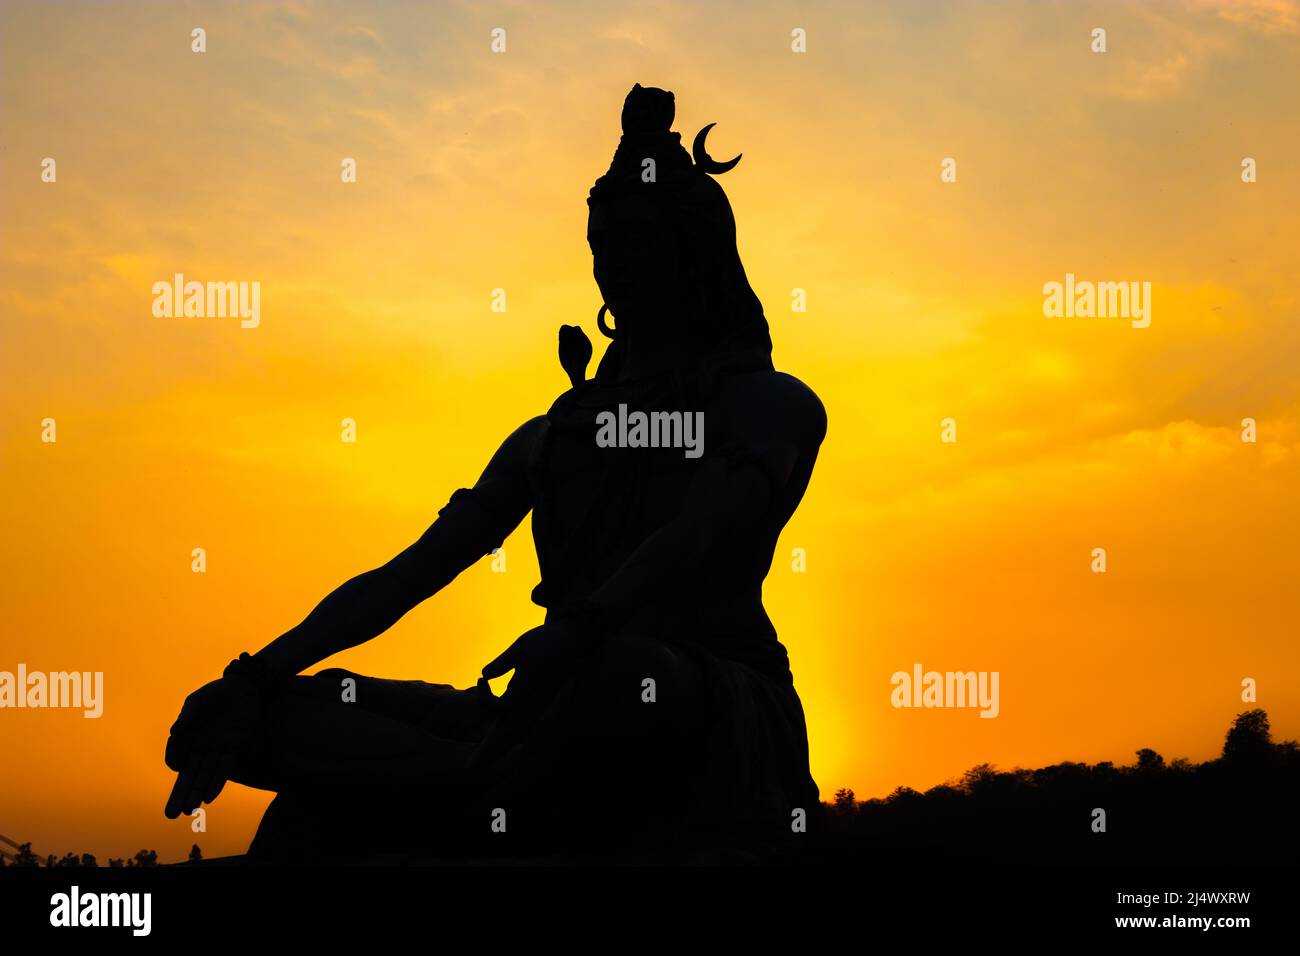 back lit statue of hindu god lord shiva in meditation posture with dramatic sky from unique angle image is taken at parmarth niketan rishikesh uttrakh Stock Photo